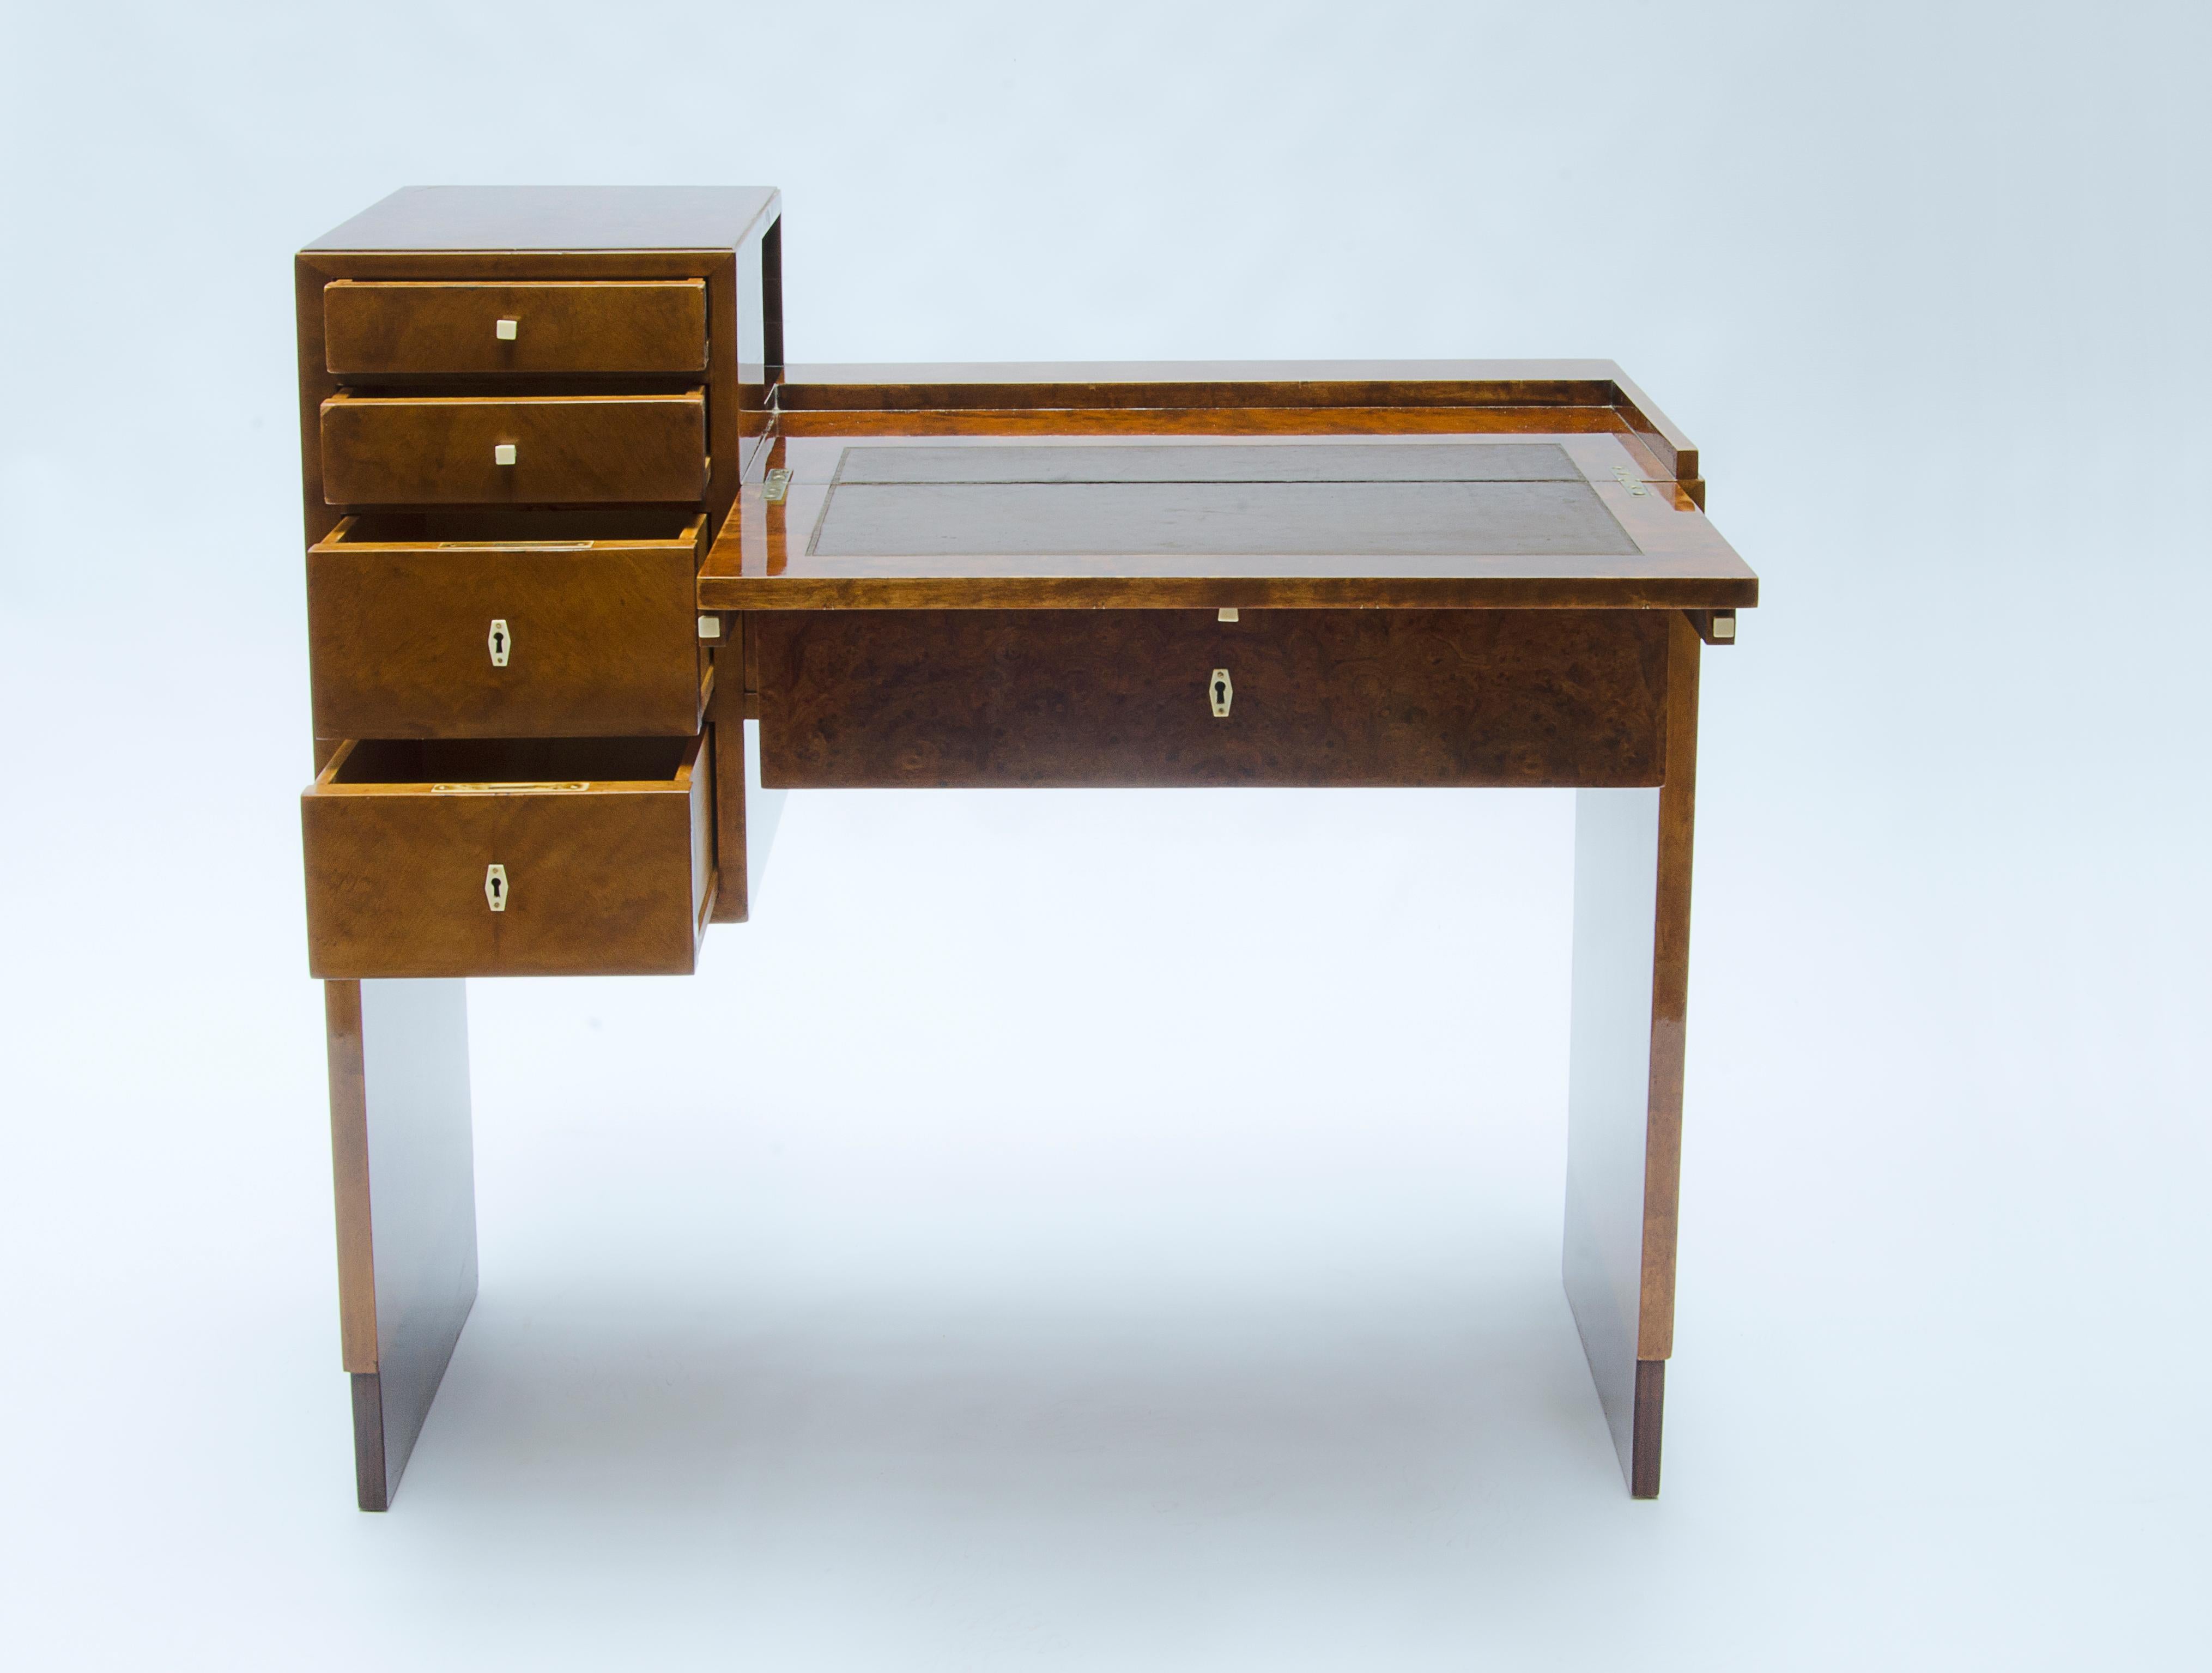 Art Deco desk, made of maple veneered wood with inlays, keyholes and ivory strips. By NORDISKA KOMPANIET S:A (1920-1970). Signed by NORDISKA KOMPANIET S,A., BS AIRES, Florida 101.

Argentina, CIRCA 1930.